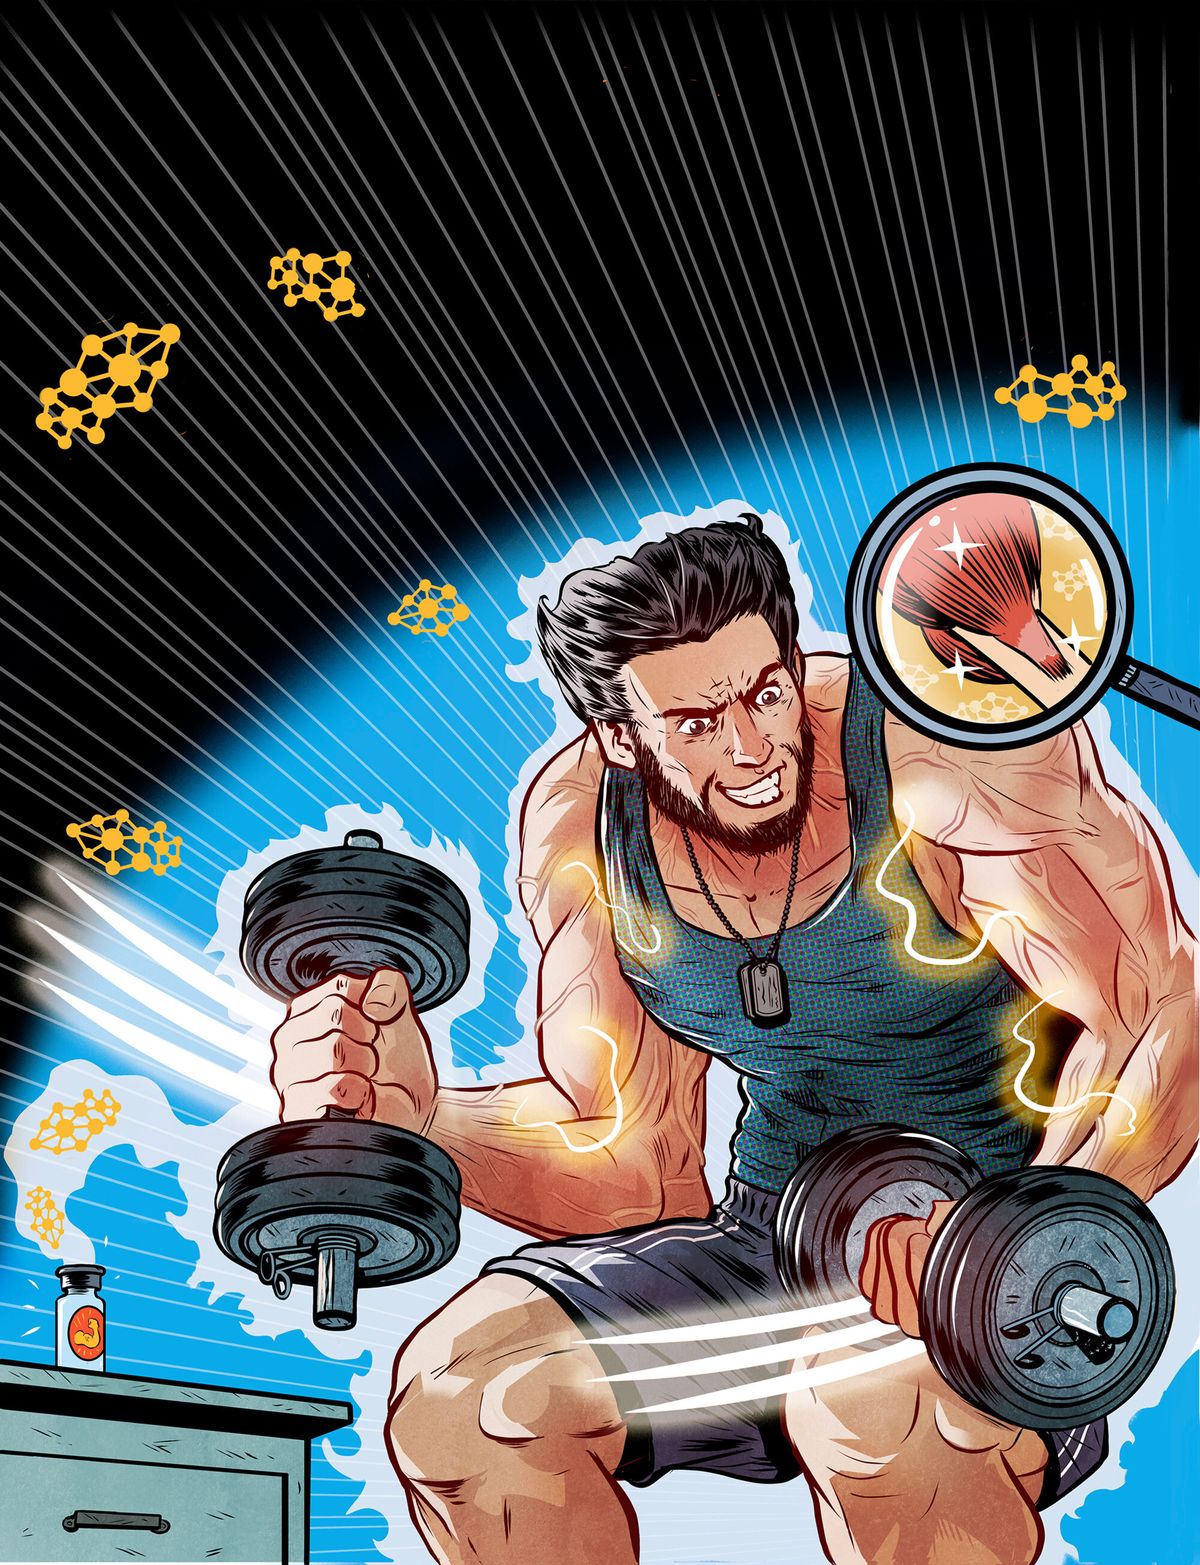 man lifting weights with wolverine claws reference coming from hands